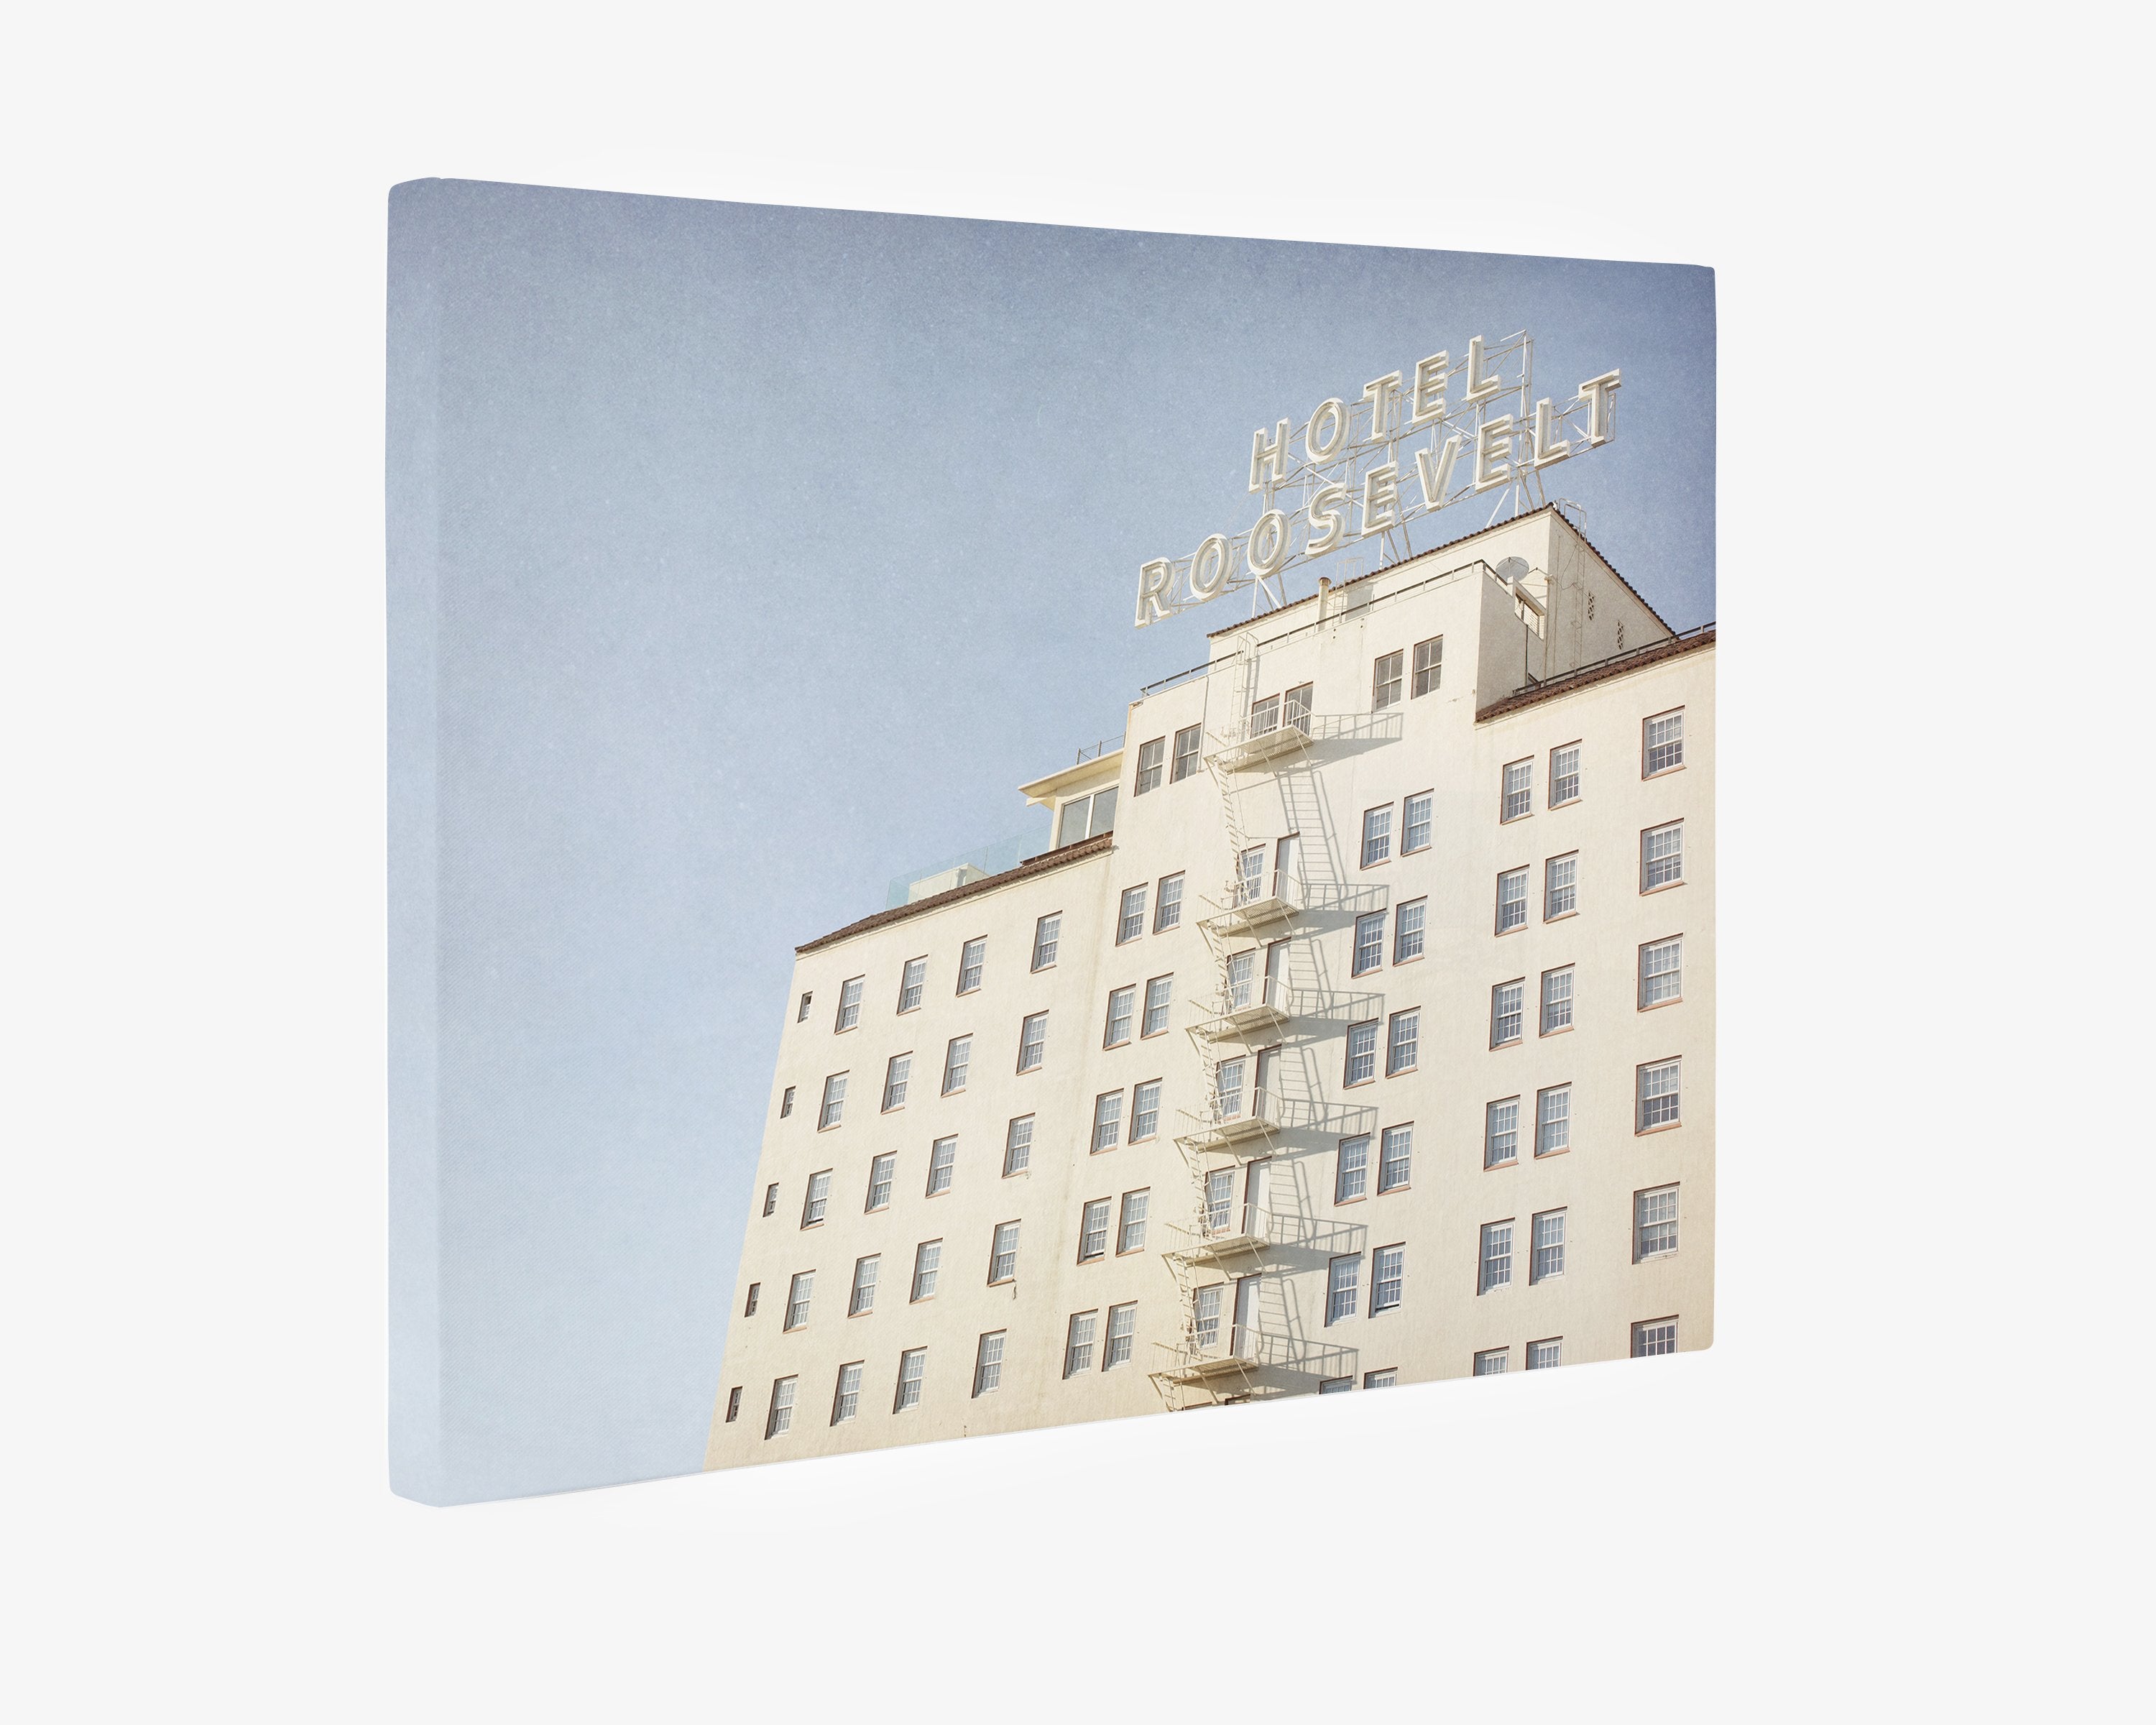 A Retro Hollywood Canvas Wall Art of the Roosevelt Hotel Hollywood by Offley Green, featuring the building&#39;s off-white facade with a fire escape, under a clear sky. The hotel name is displayed at the top in bold letters.